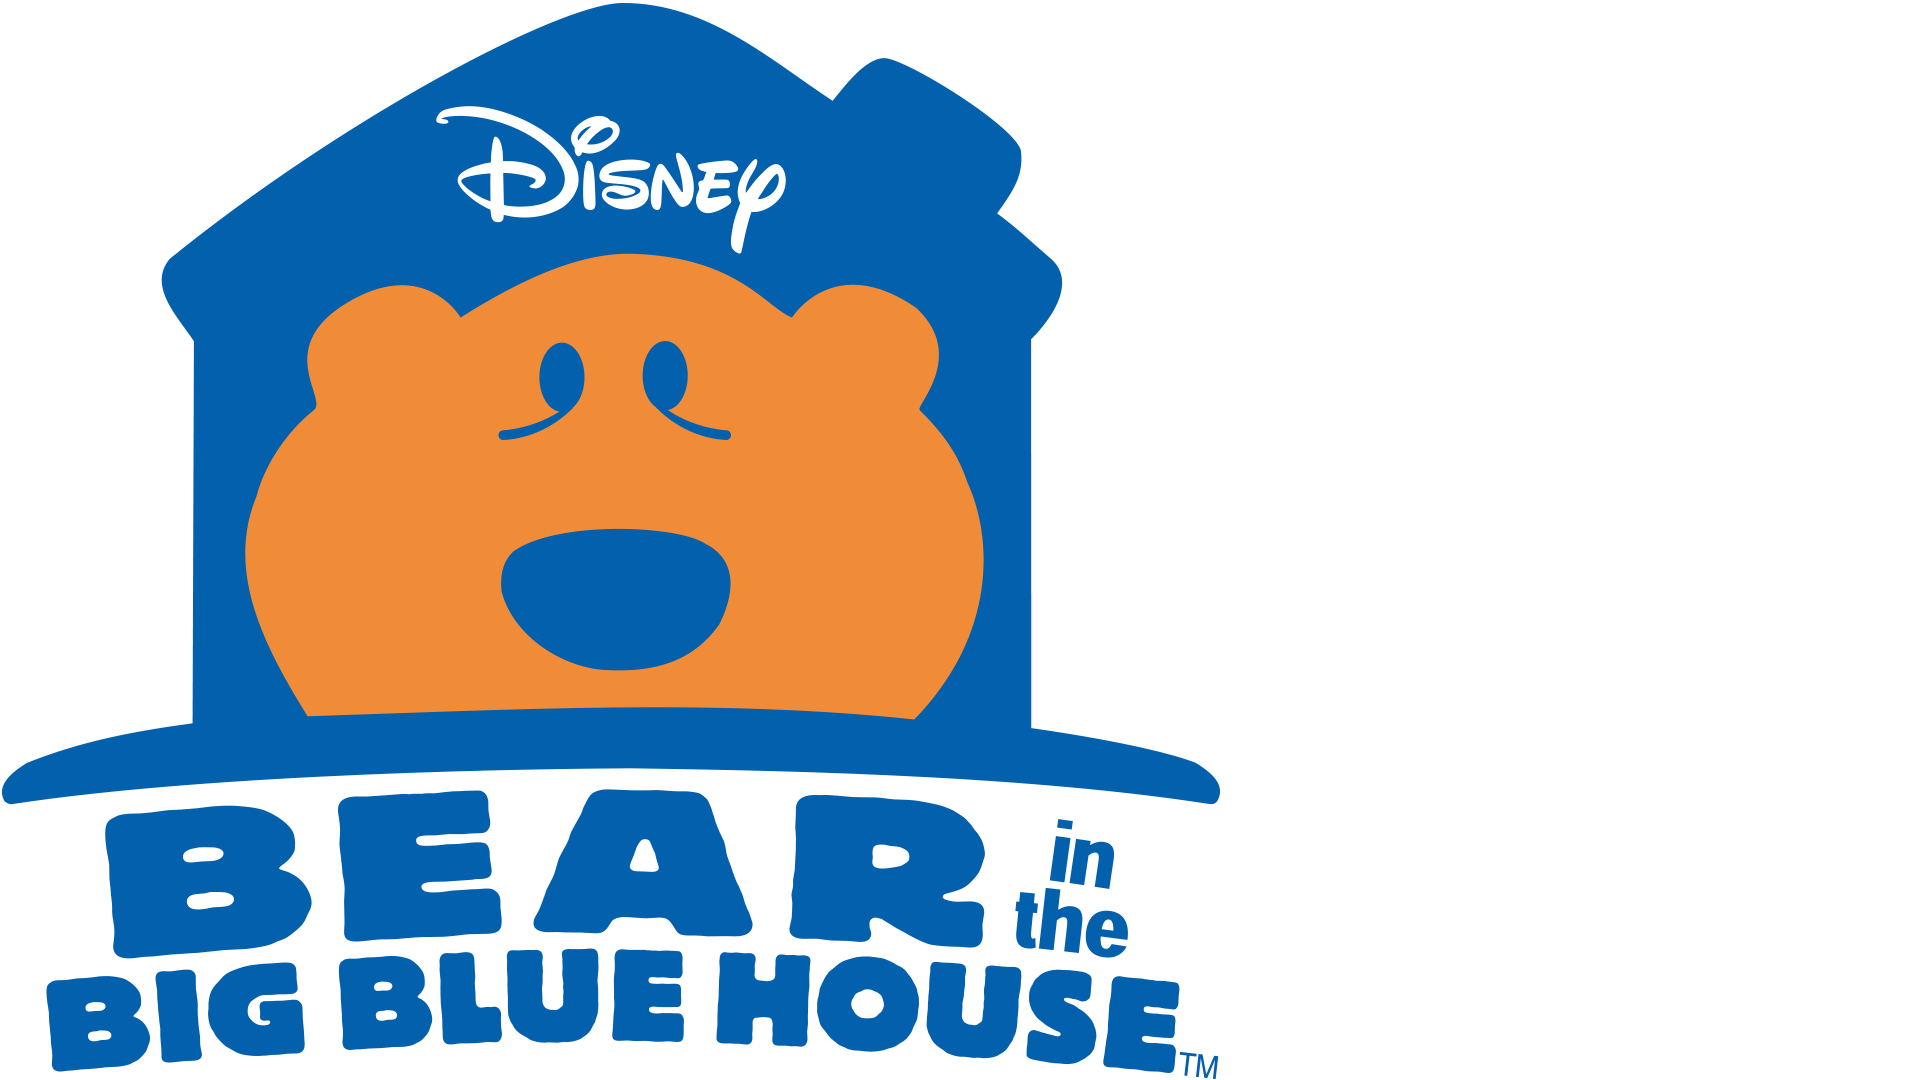 Bear in the Big Blue House' Is Now Streaming on Disney+